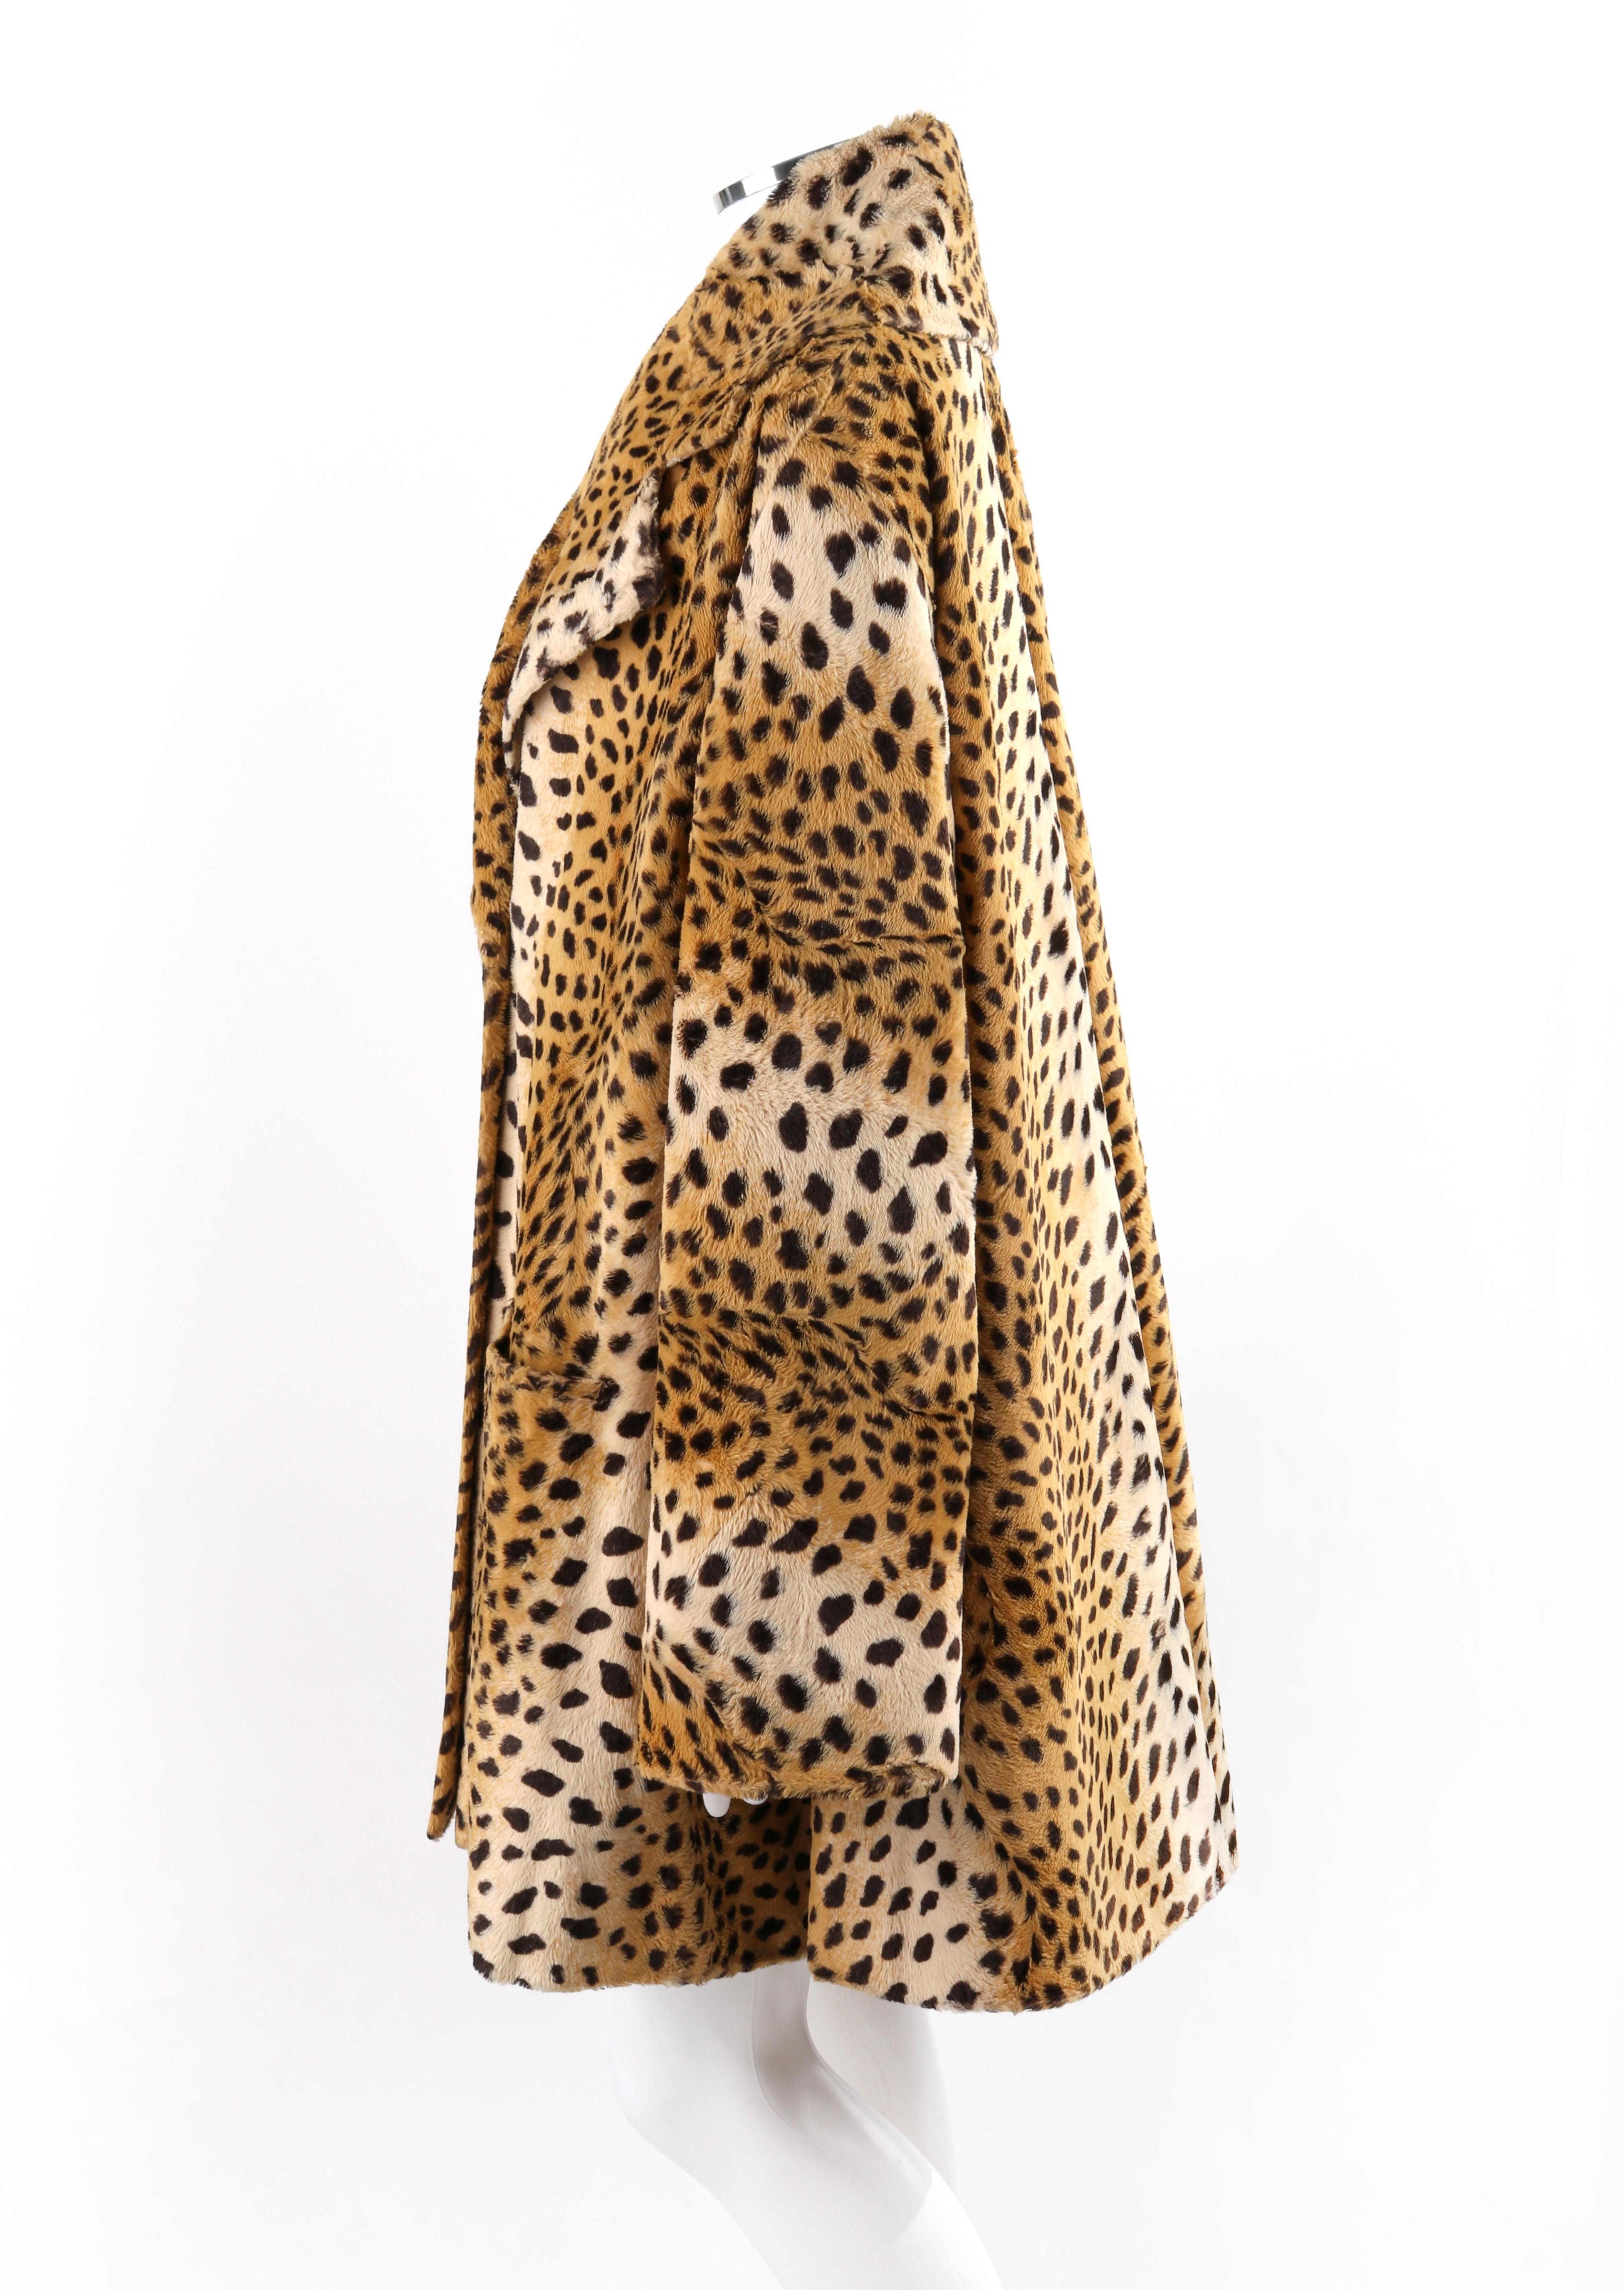 Brown GIVENCHY COUTURE A/W 1997 ALEXANDER McQUEEN Cheetah Print Faux Fur Paneled Coat For Sale